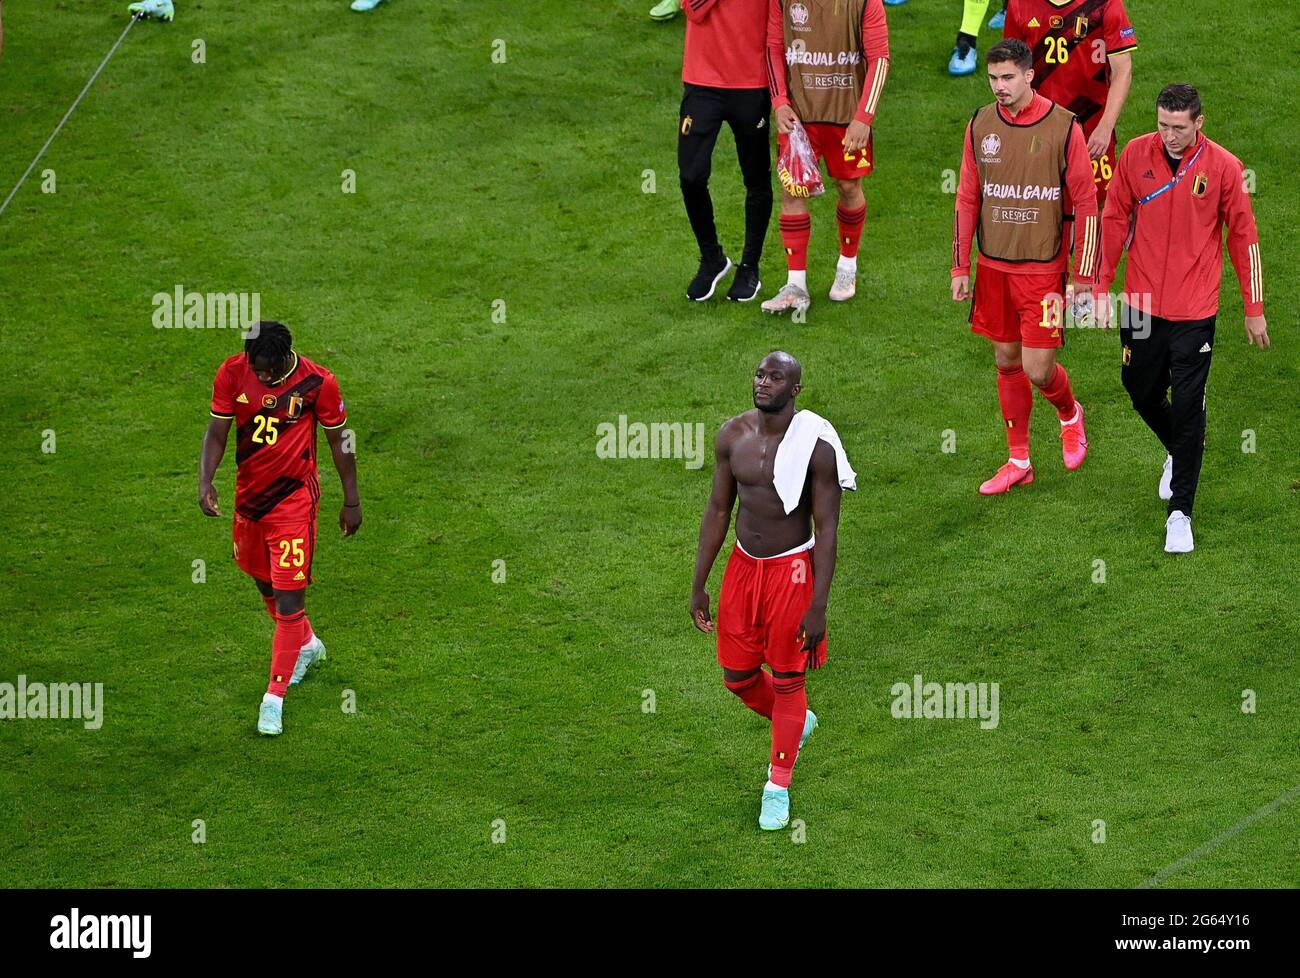 Munchen, Germany. 02nd July, 2021. Belgian players with Belgian forward Romelu Lukaku (9) pictured looking dejected and disappointed after a soccer game during the quarter final Euro 2020 European Championship between the Belgian national soccer team Red Devils and Italy, called the Azzurri, on friday 2 nd of July 2021 in the Allianz Arena in Munchen, Germany . PHOTO SPORTPIX | SPP | DAVID CATRY Credit: SPP Sport Press Photo. /Alamy Live News Stock Photo